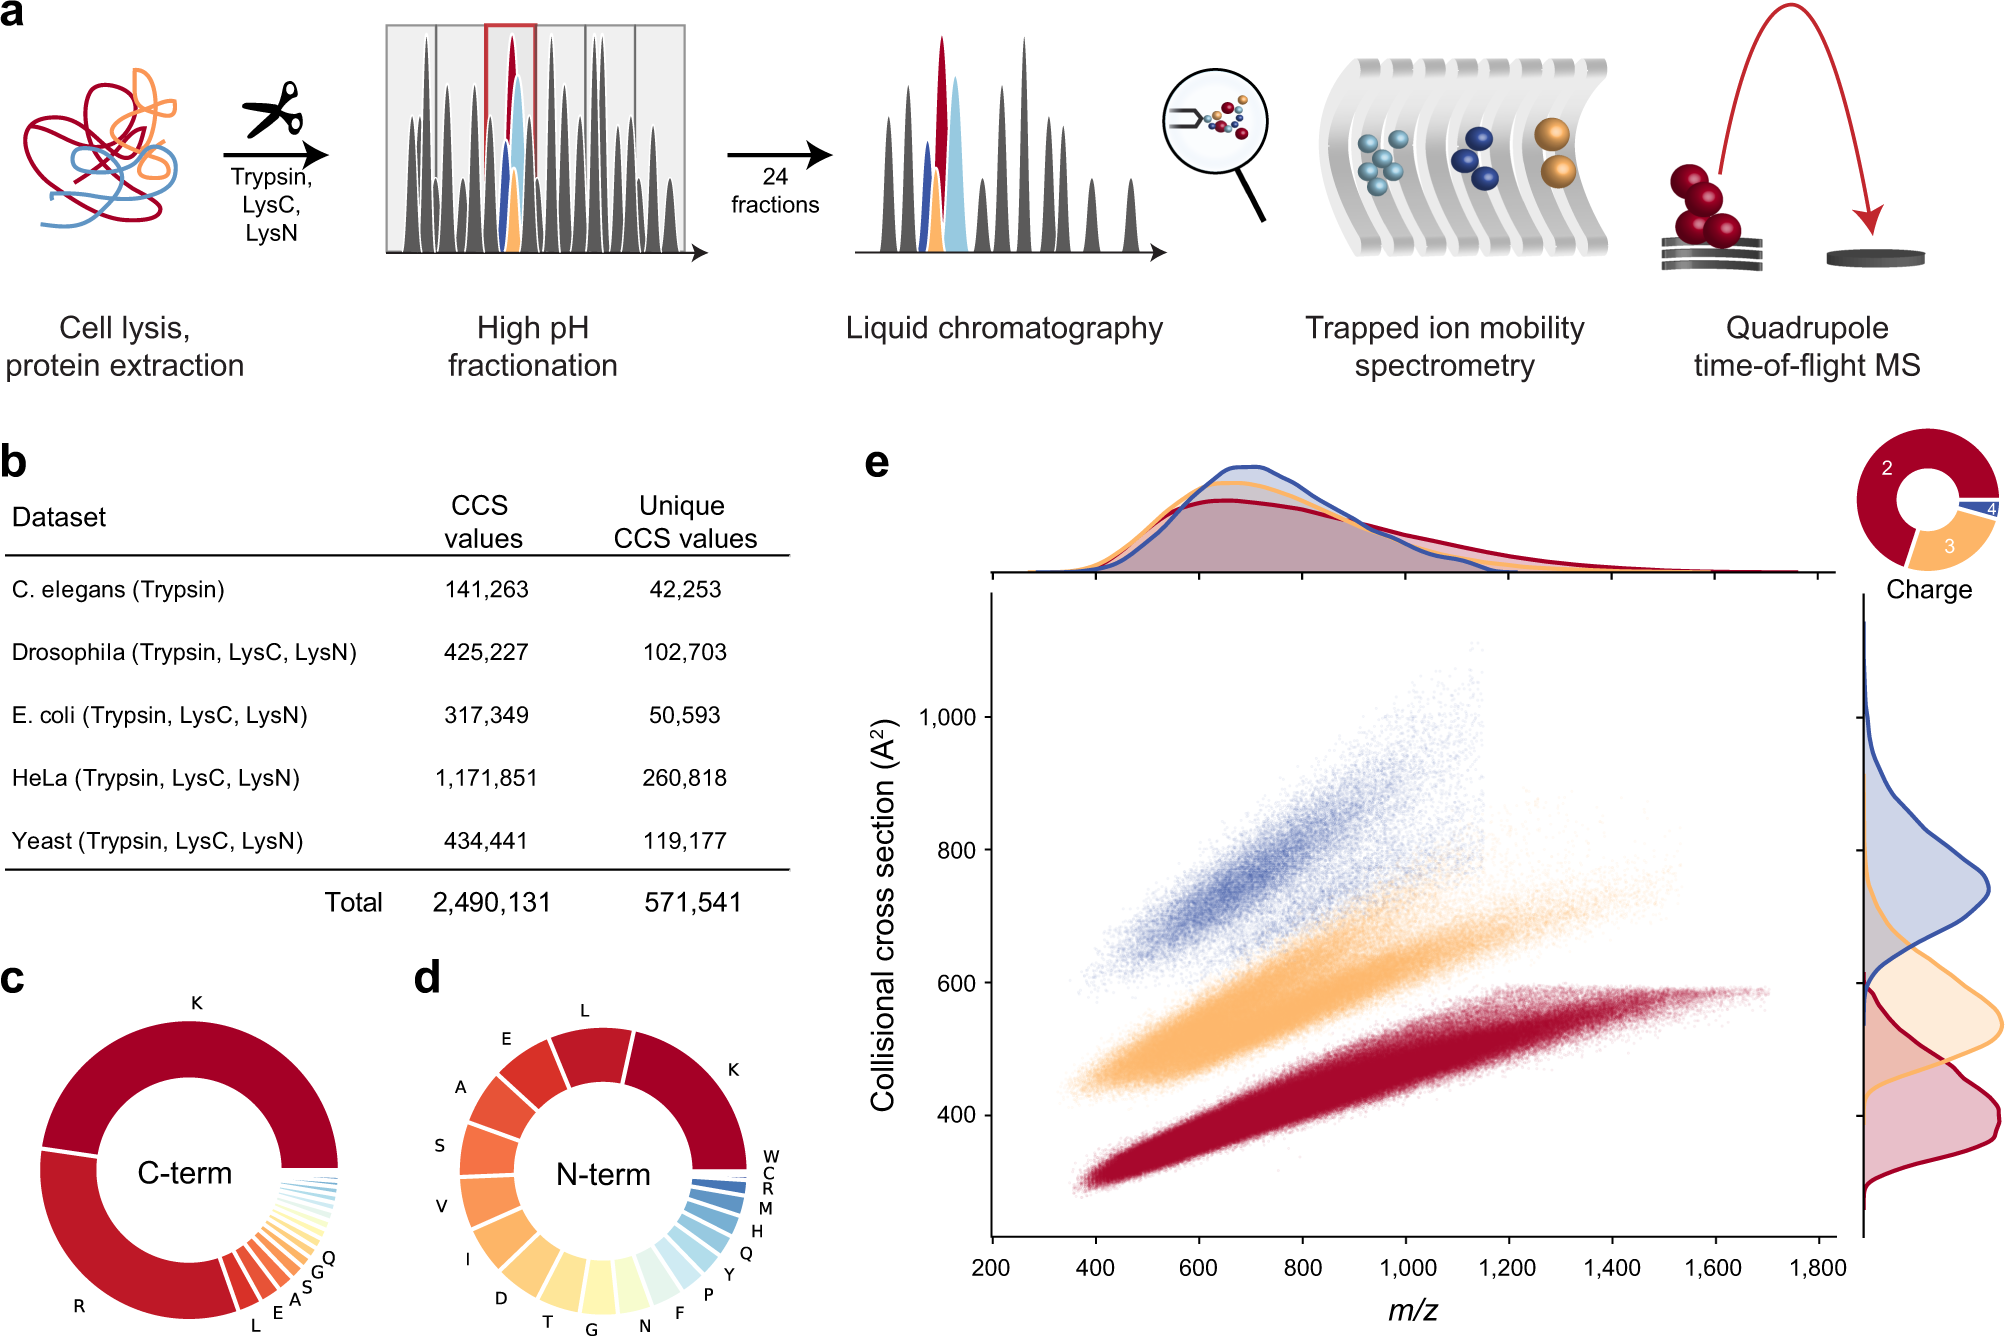 Deep learning the collisional cross sections of the peptide universe from a  million experimental values | Nature Communications